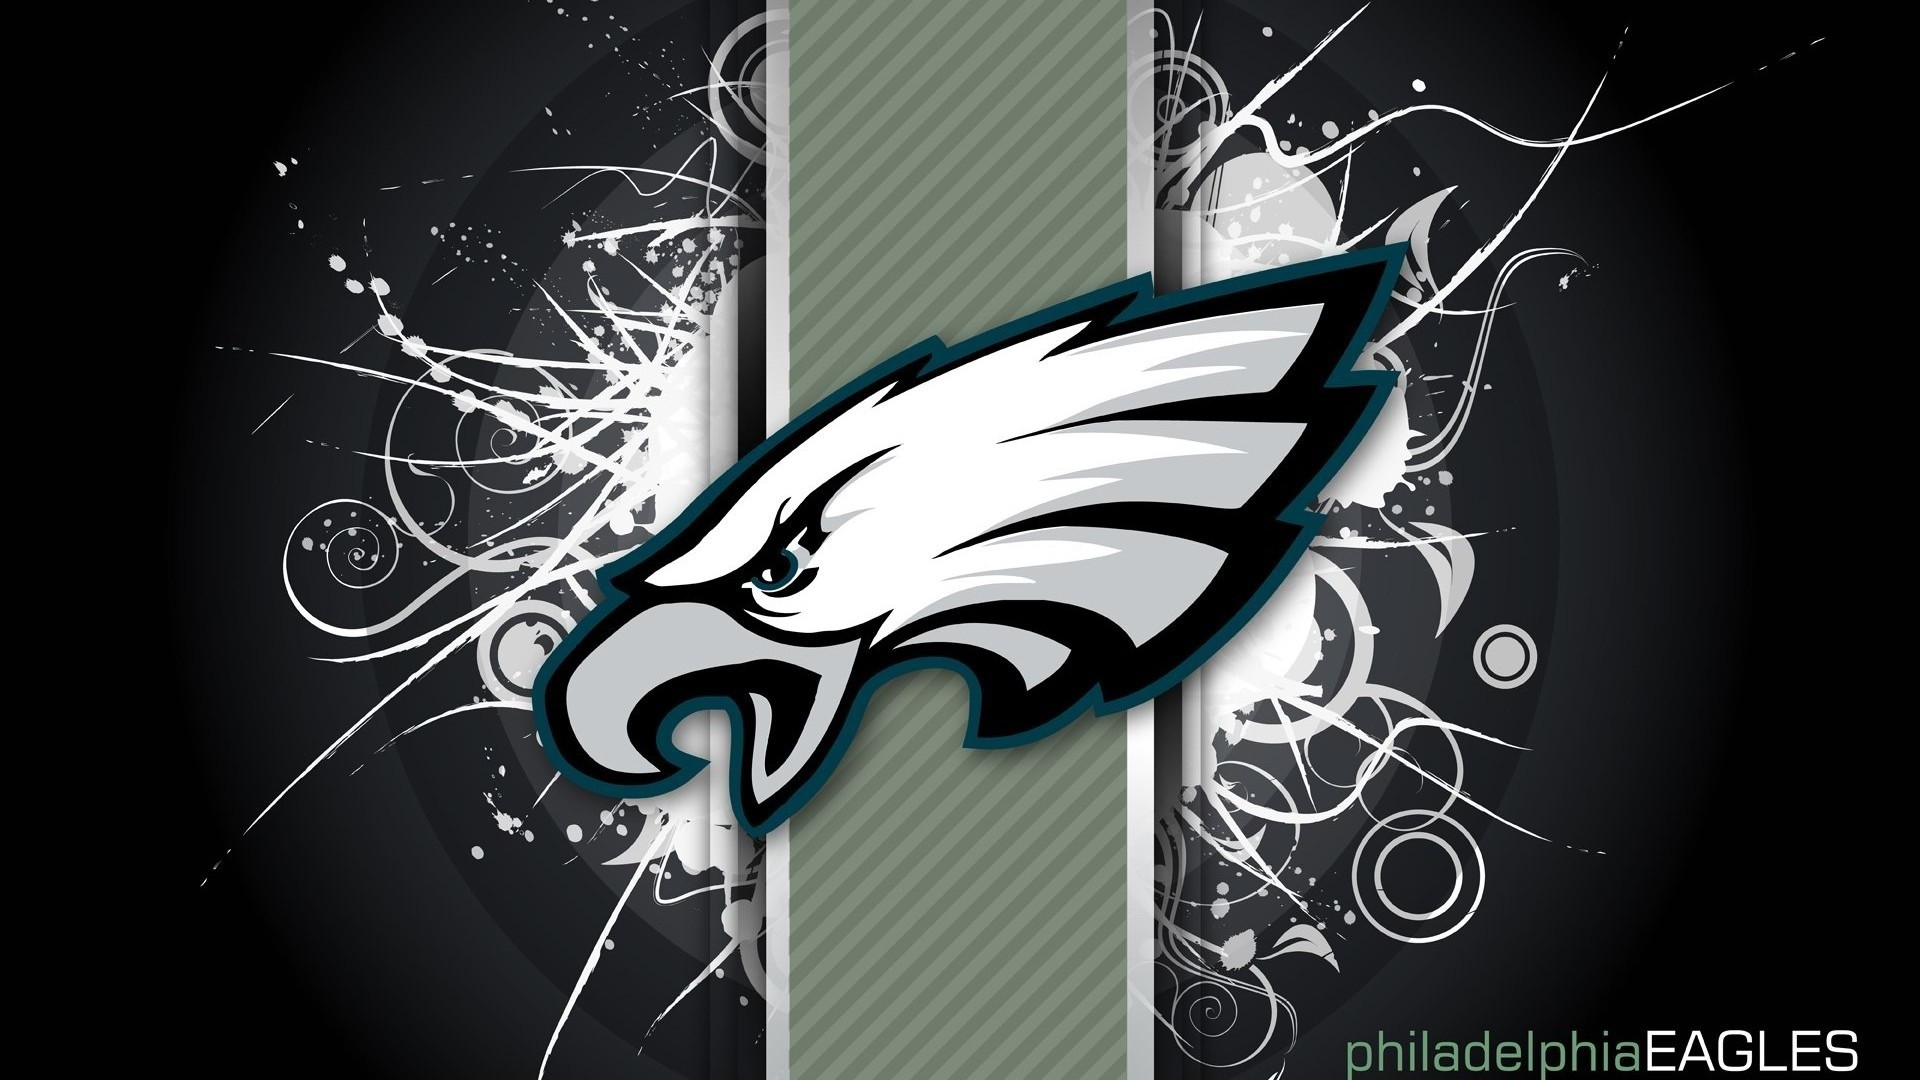 Wallpapers Eagles Football with resolution 1920x1080 pixel. You can make this wallpaper for your Mac or Windows Desktop Background, iPhone, Android or Tablet and another Smartphone device